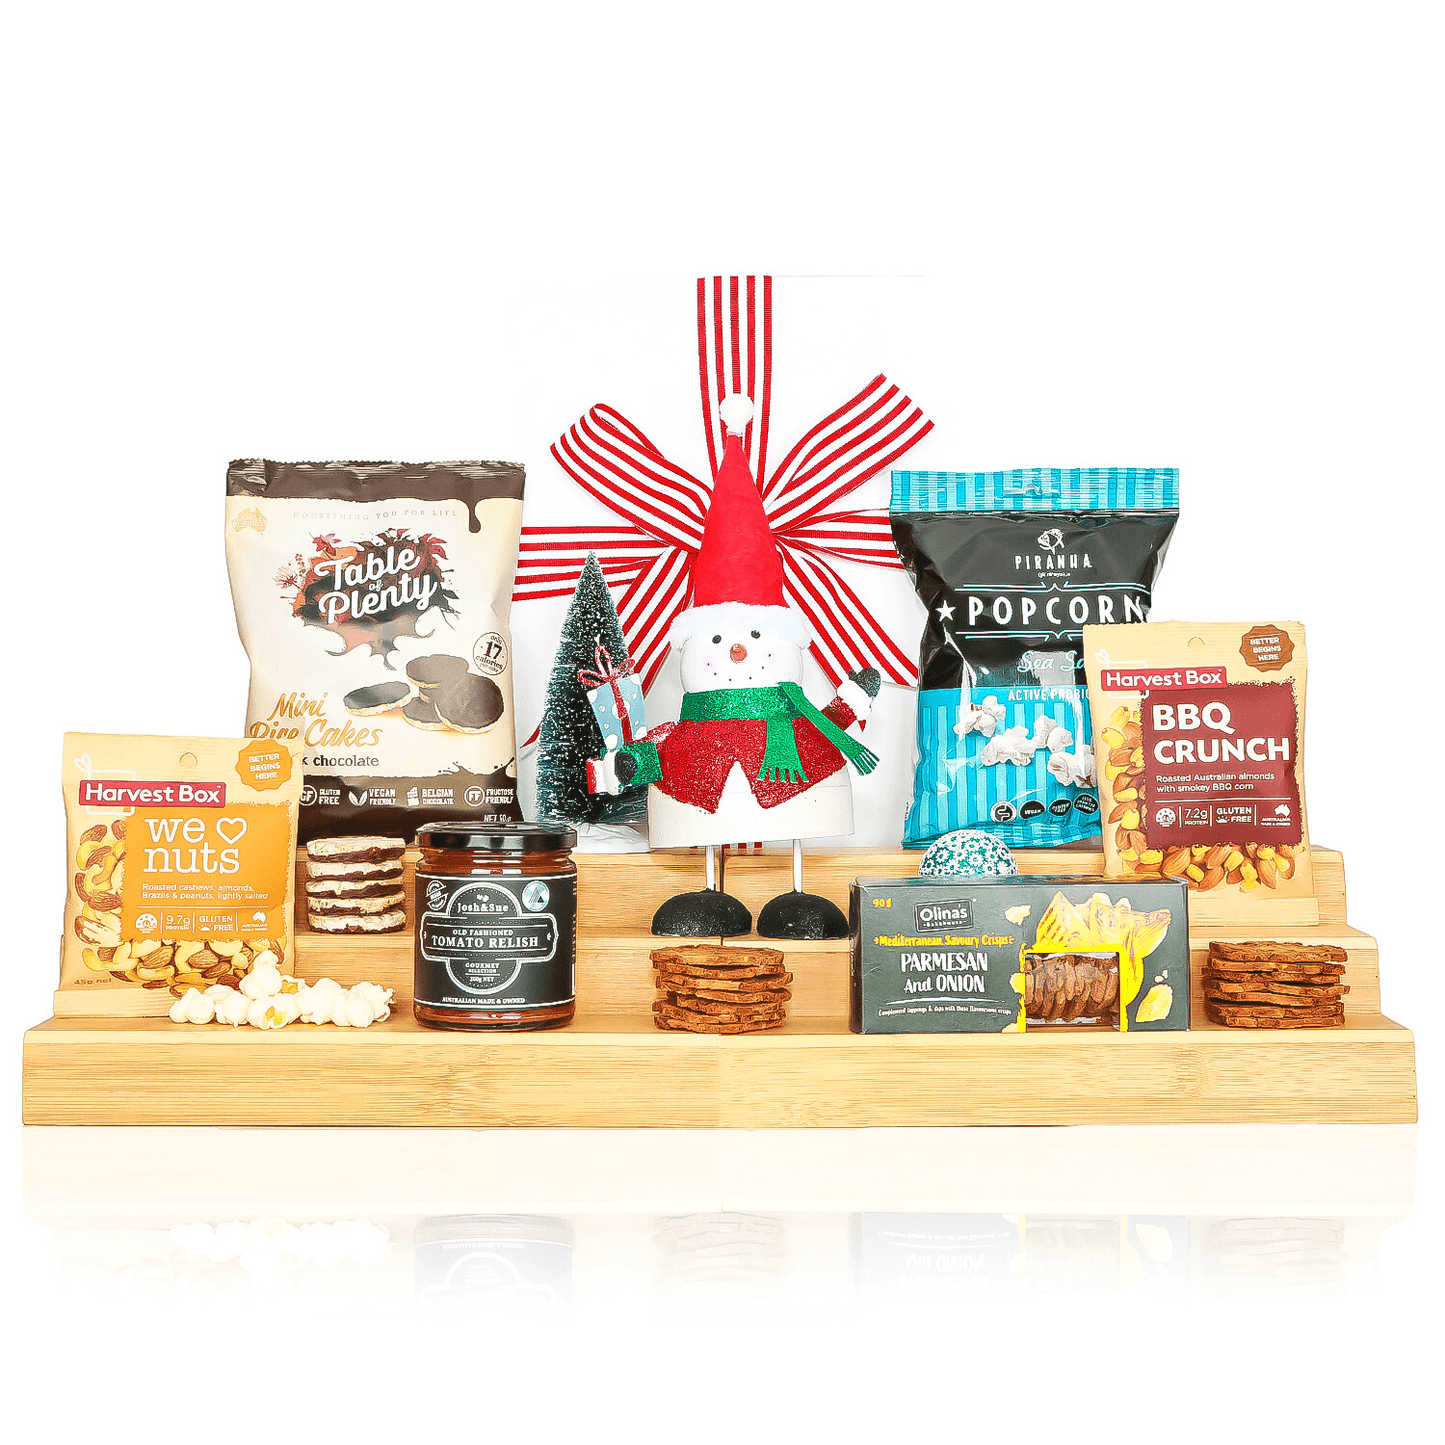 Christmas Snack Hamper - Healthy Belly Hampers - pure indulgence - birthday hampers - gift hampers - gift hampers melbourne - gift hampers australia - organic hampers -vegan hampers - gluten free hampers - birthday hampers -anniversary hampers - wedding hampers - alcohol hampers